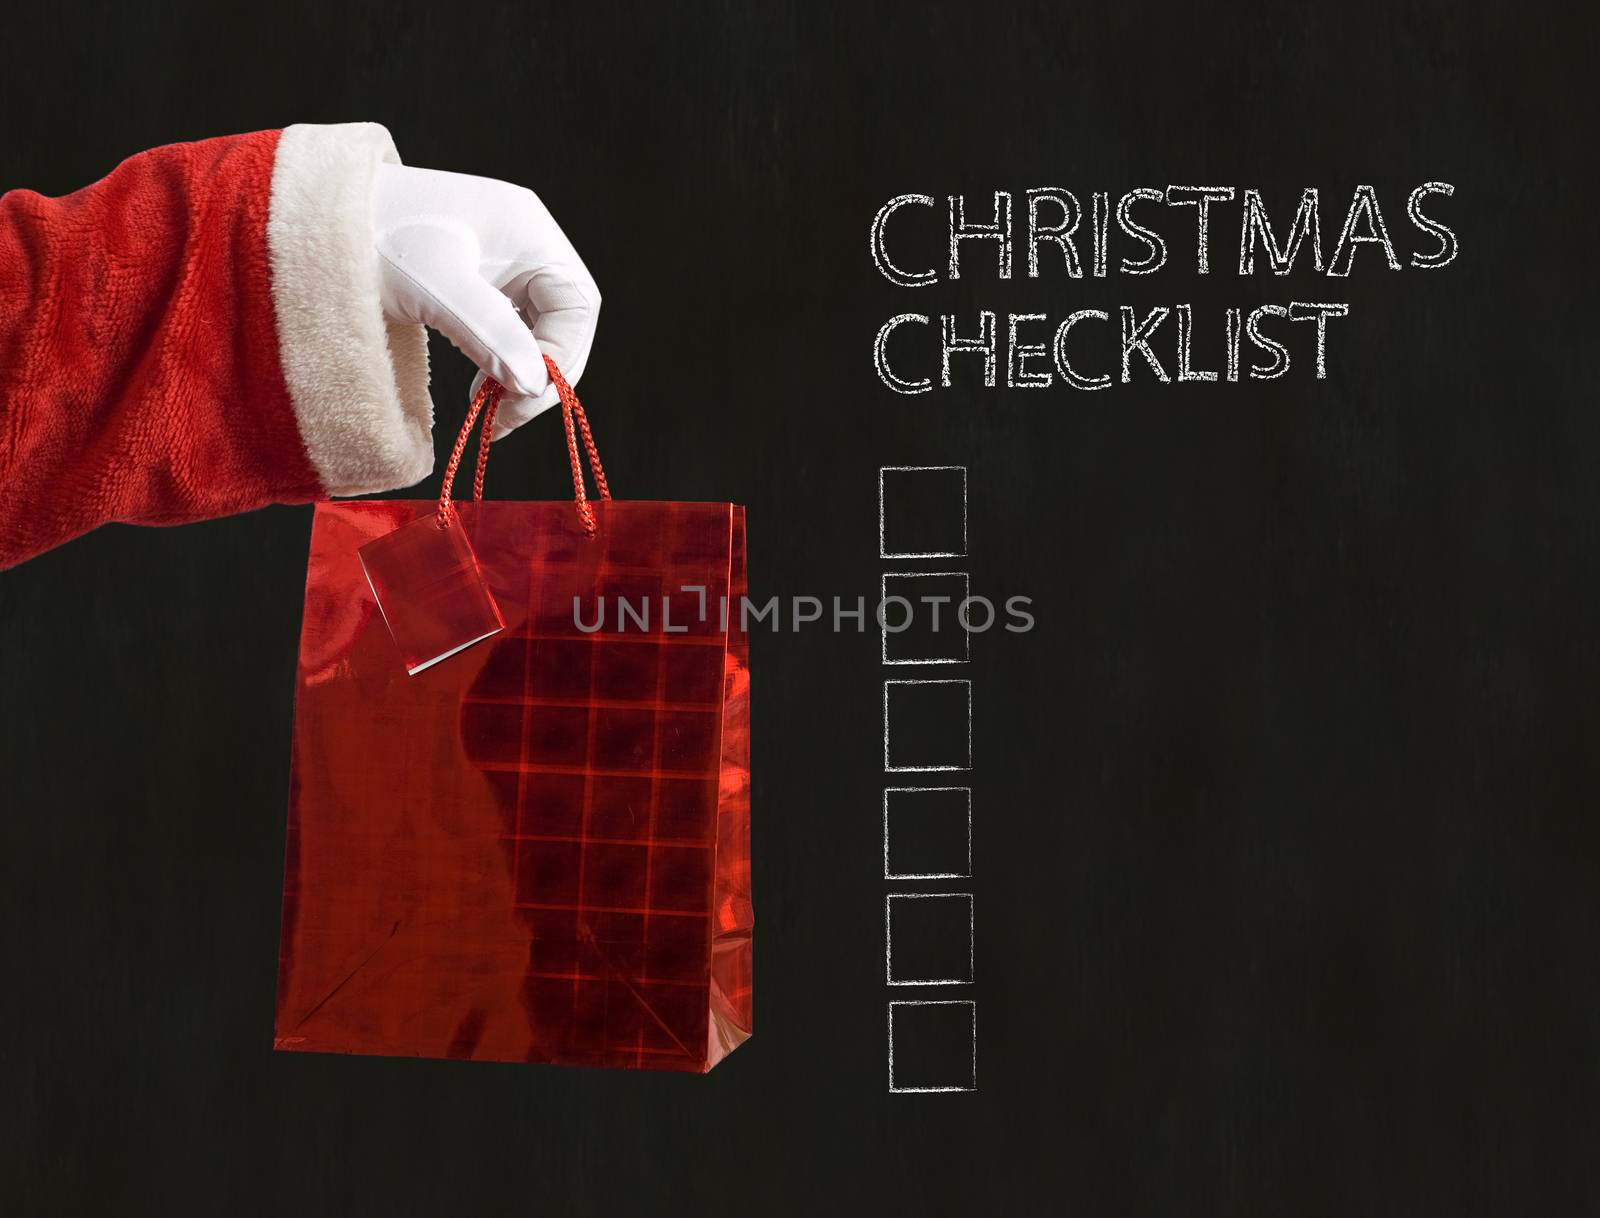 Father Christmas hand holding a red present on blackboard background with checklist